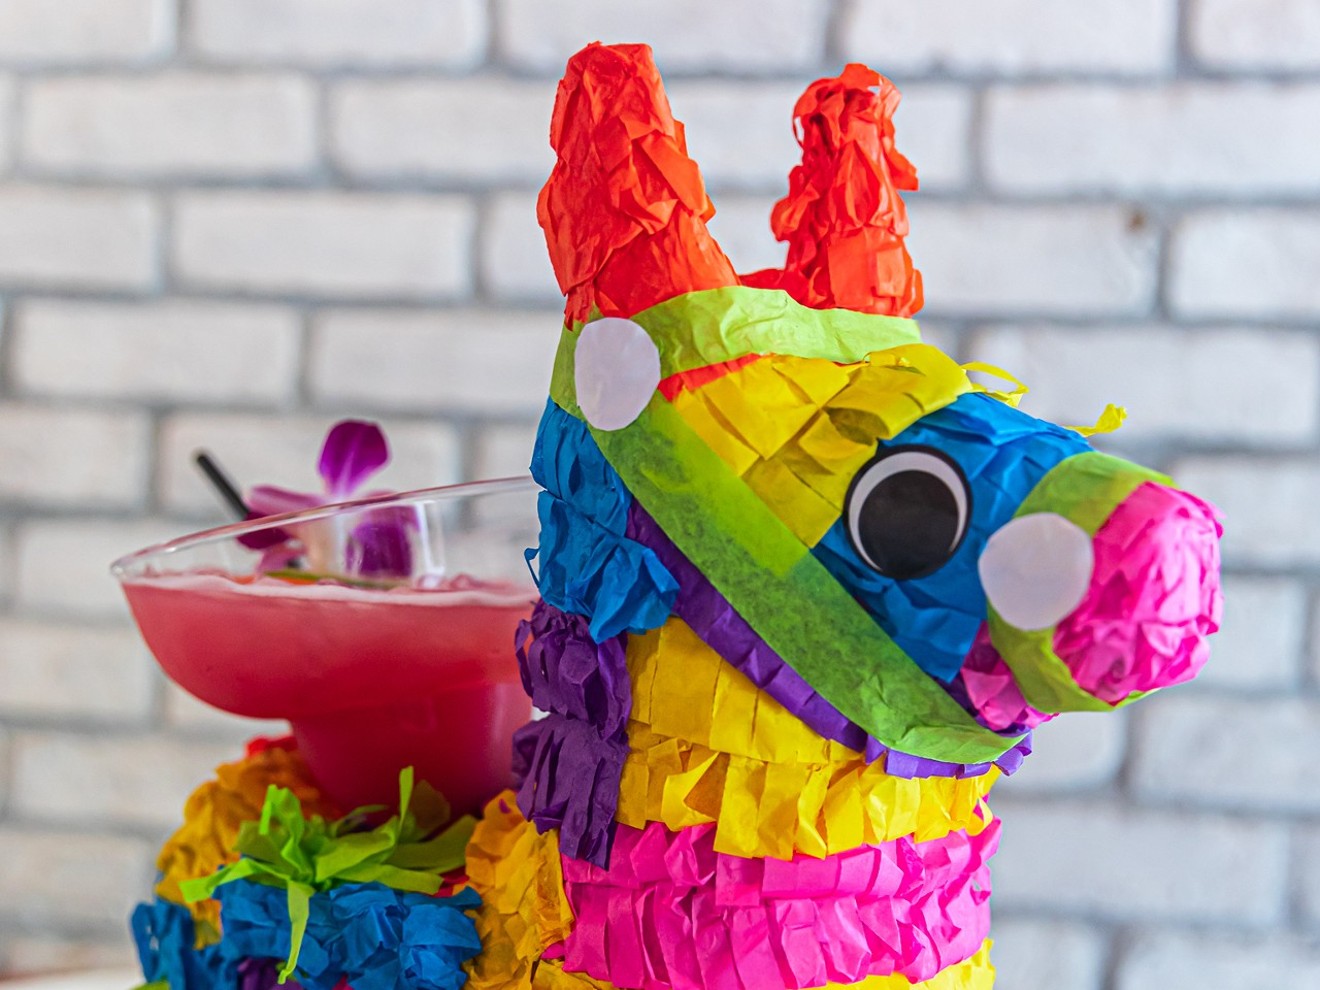 The Mexicano is slated to bring its piñata margaritas to Chandler this fall.